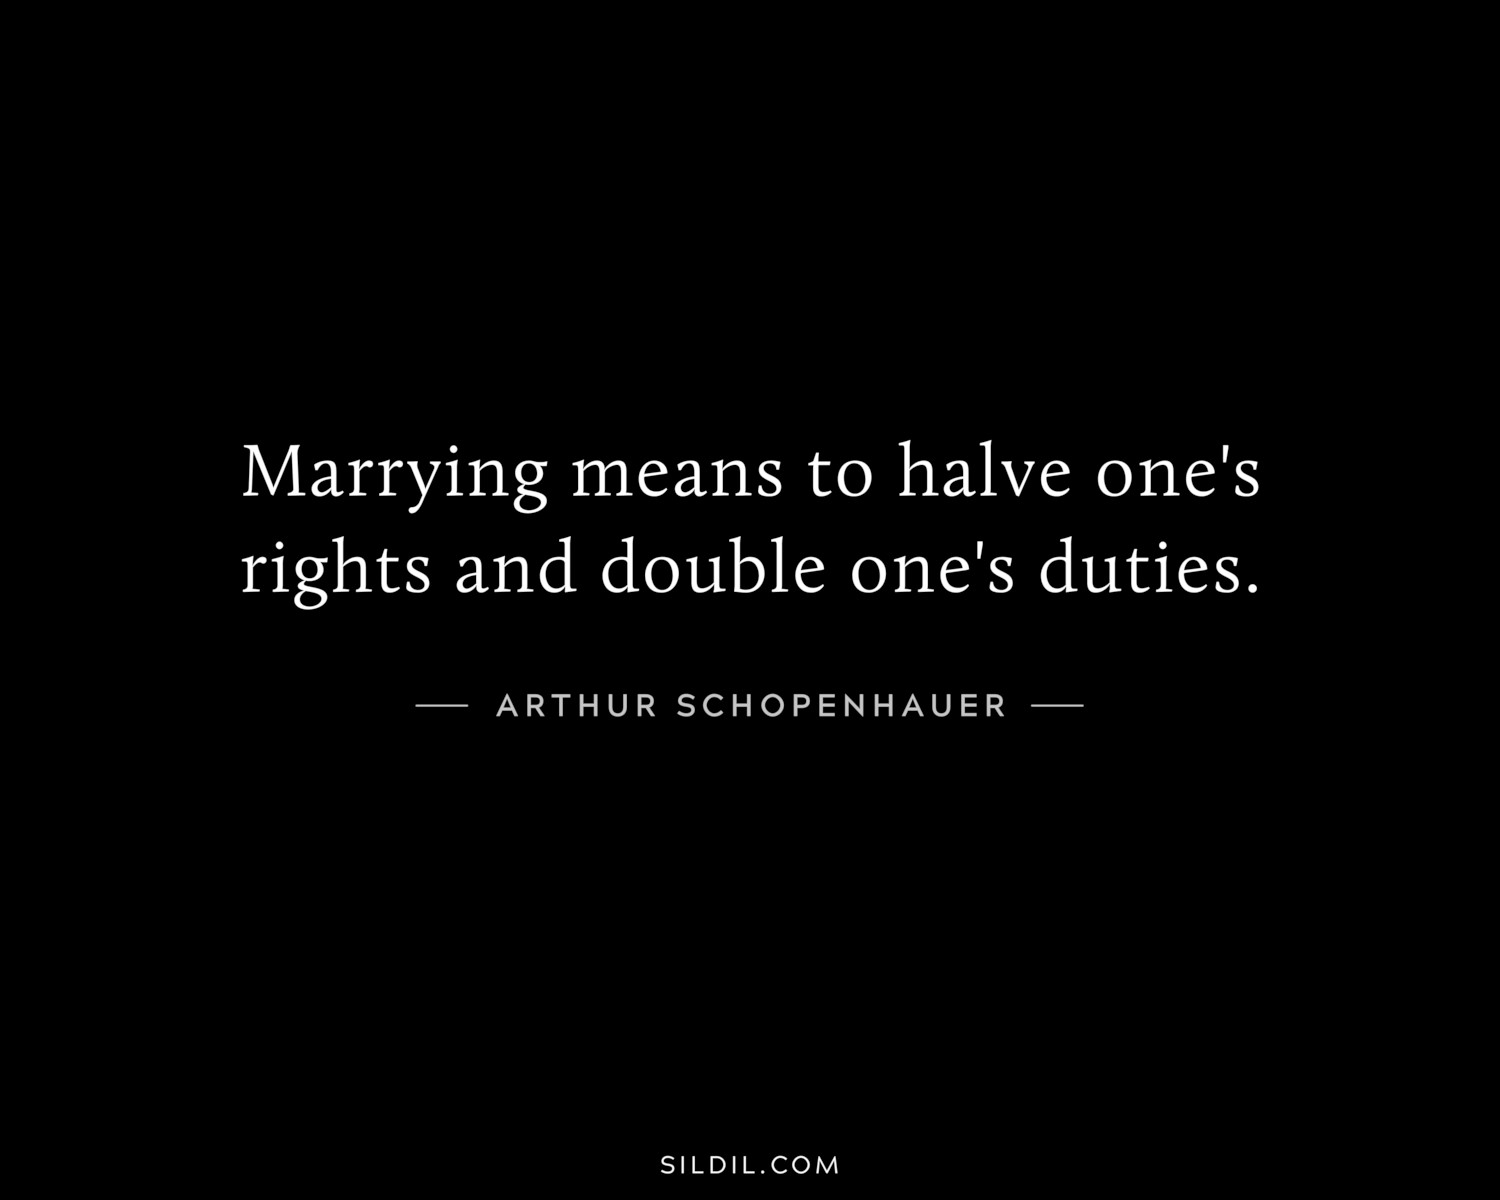 Marrying means to halve one's rights and double one's duties.